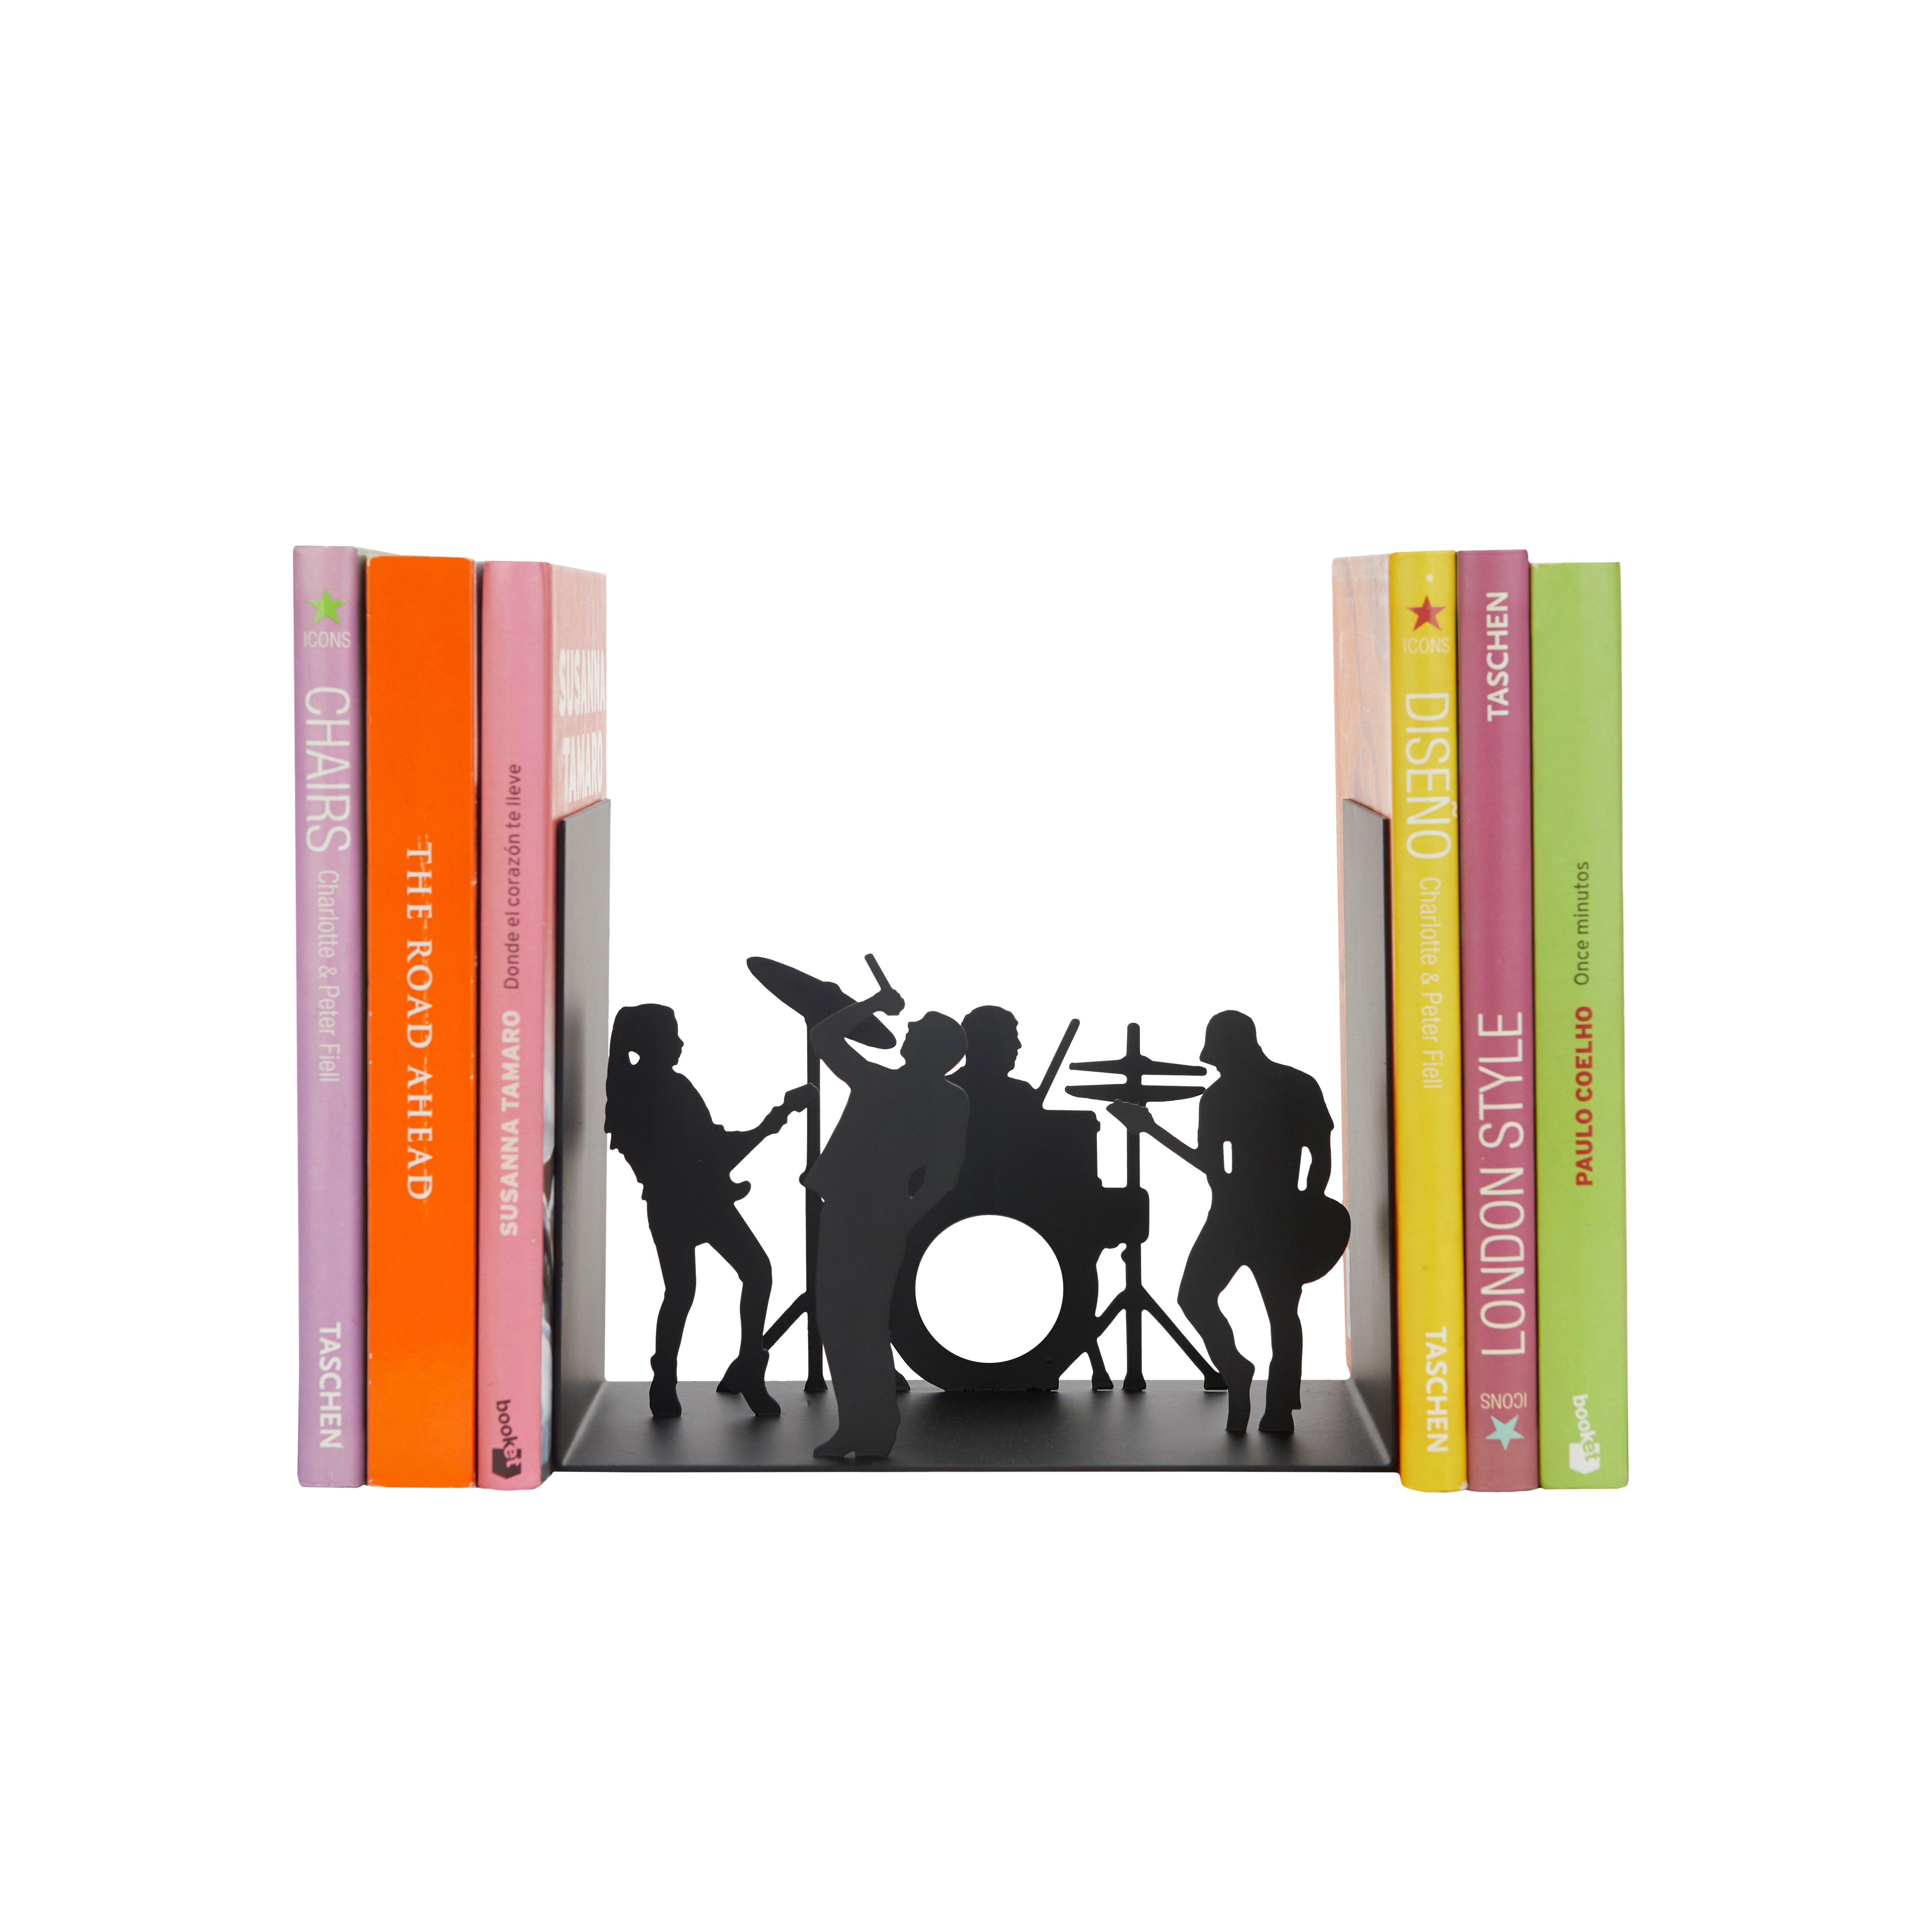 The Band Bookend